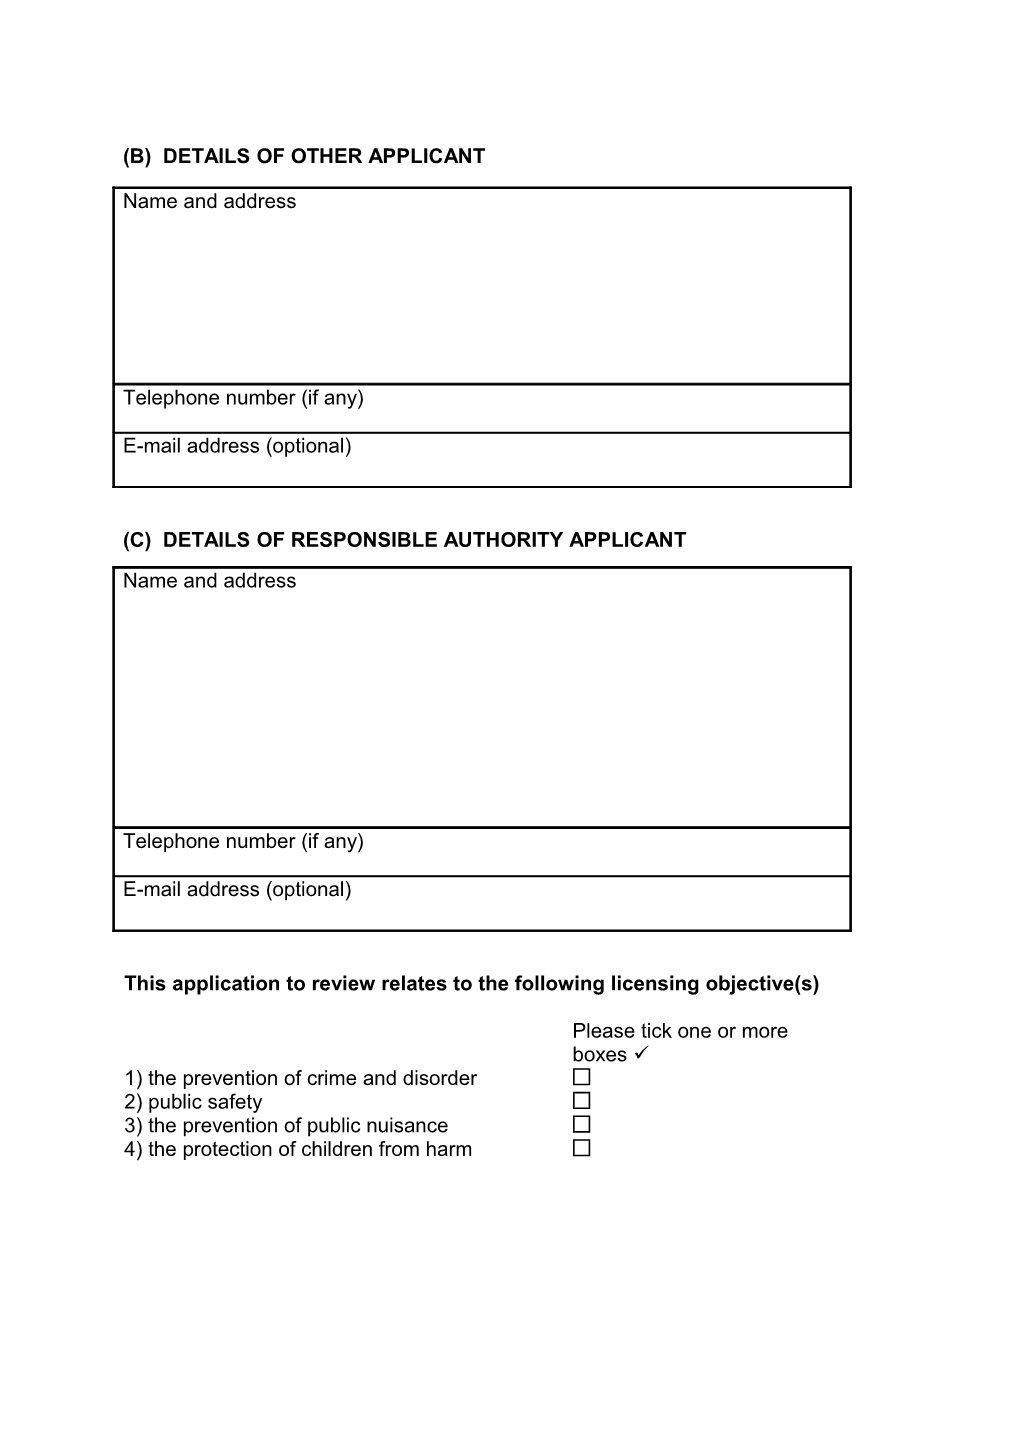 Review Application Form and Guidance